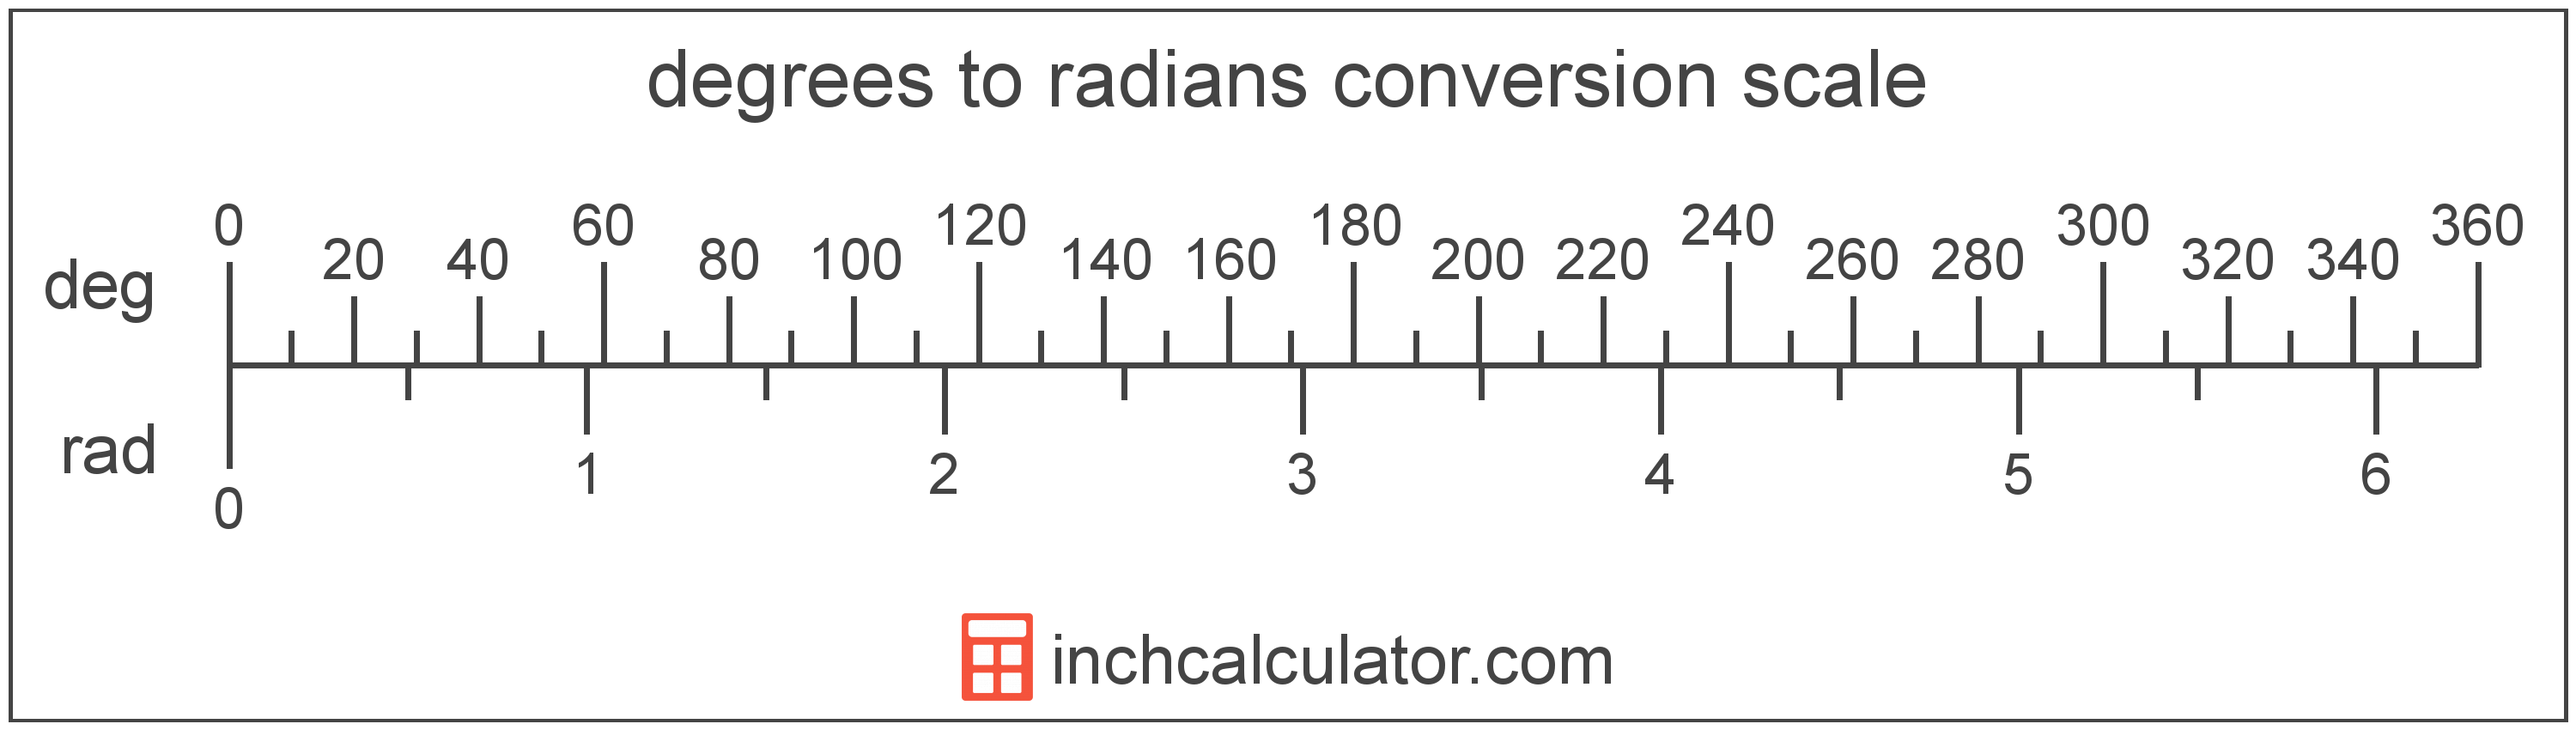 Degrees to Radians Conversion (° to rad) - Inch Calculator